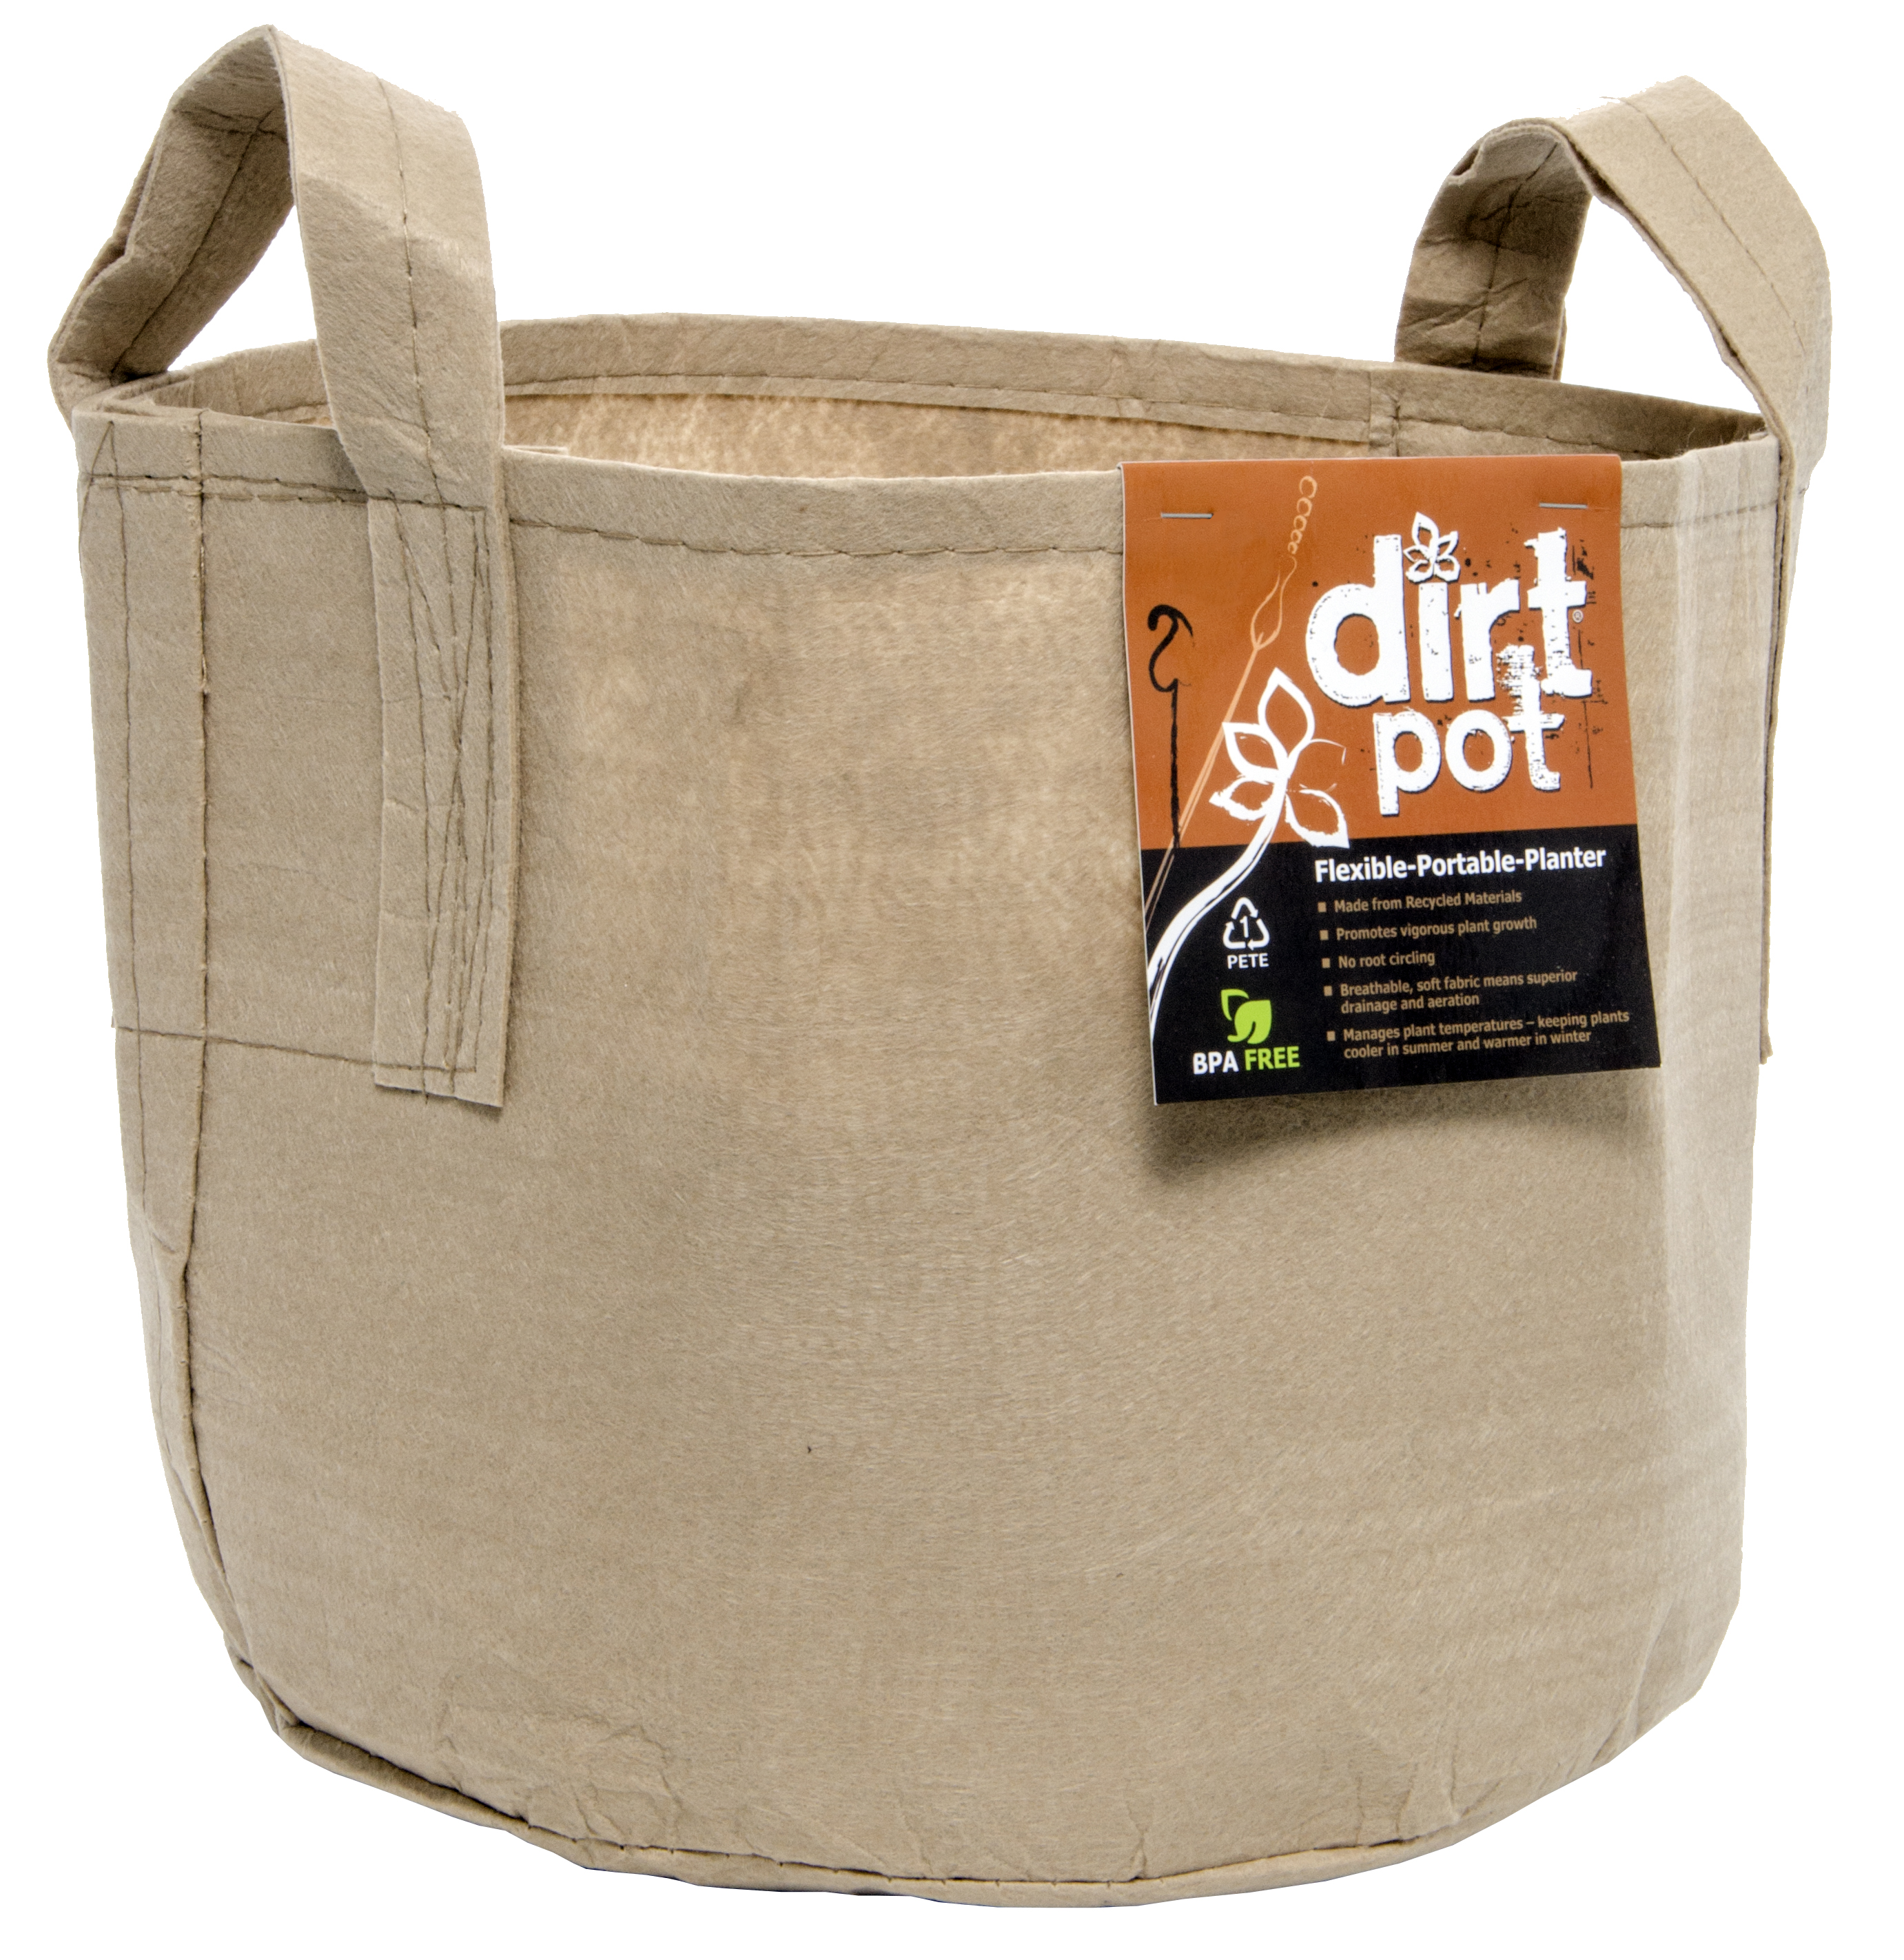 Picture for Dirt Pot Flexible Portable Planter, Tan, 65 gal, with handles